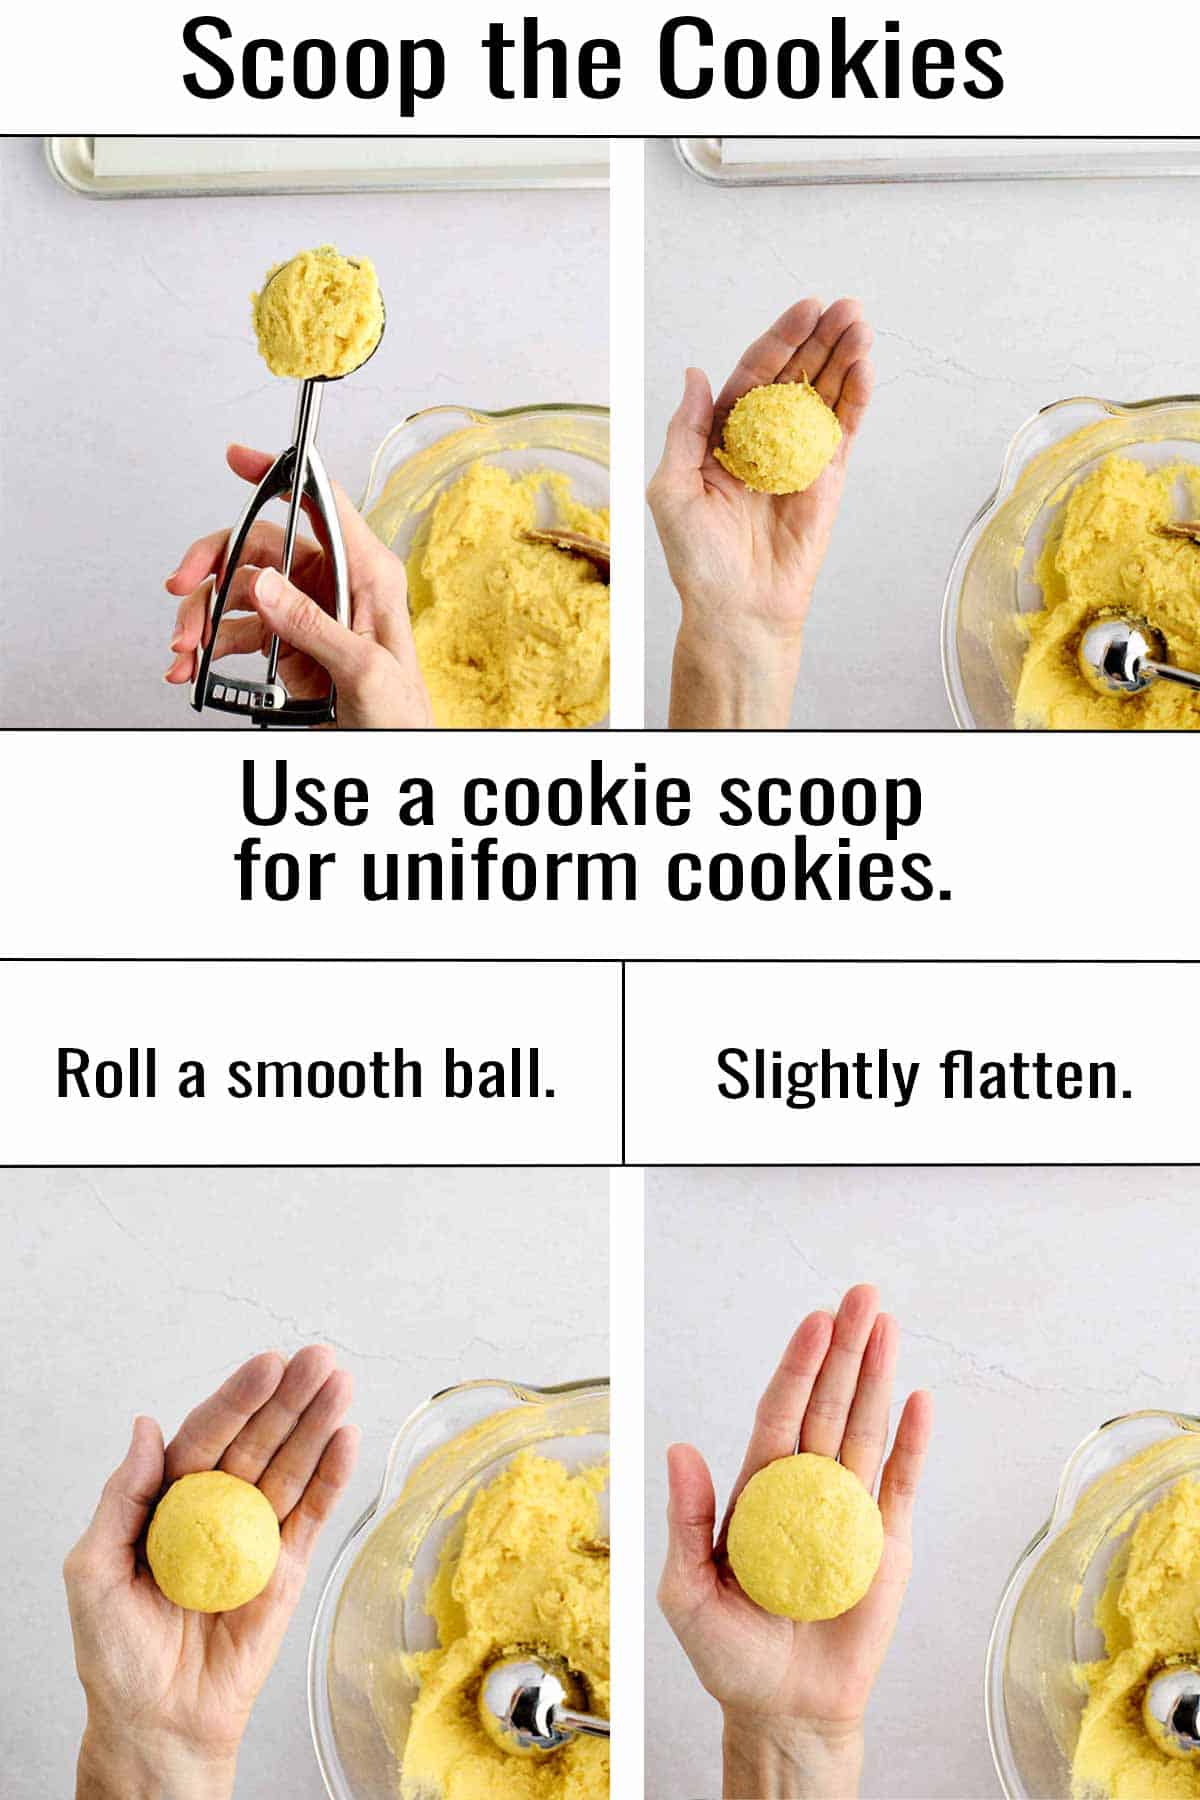 Scooping the cookie dough, rolling it into a smooth ball, and slightly flattening it.